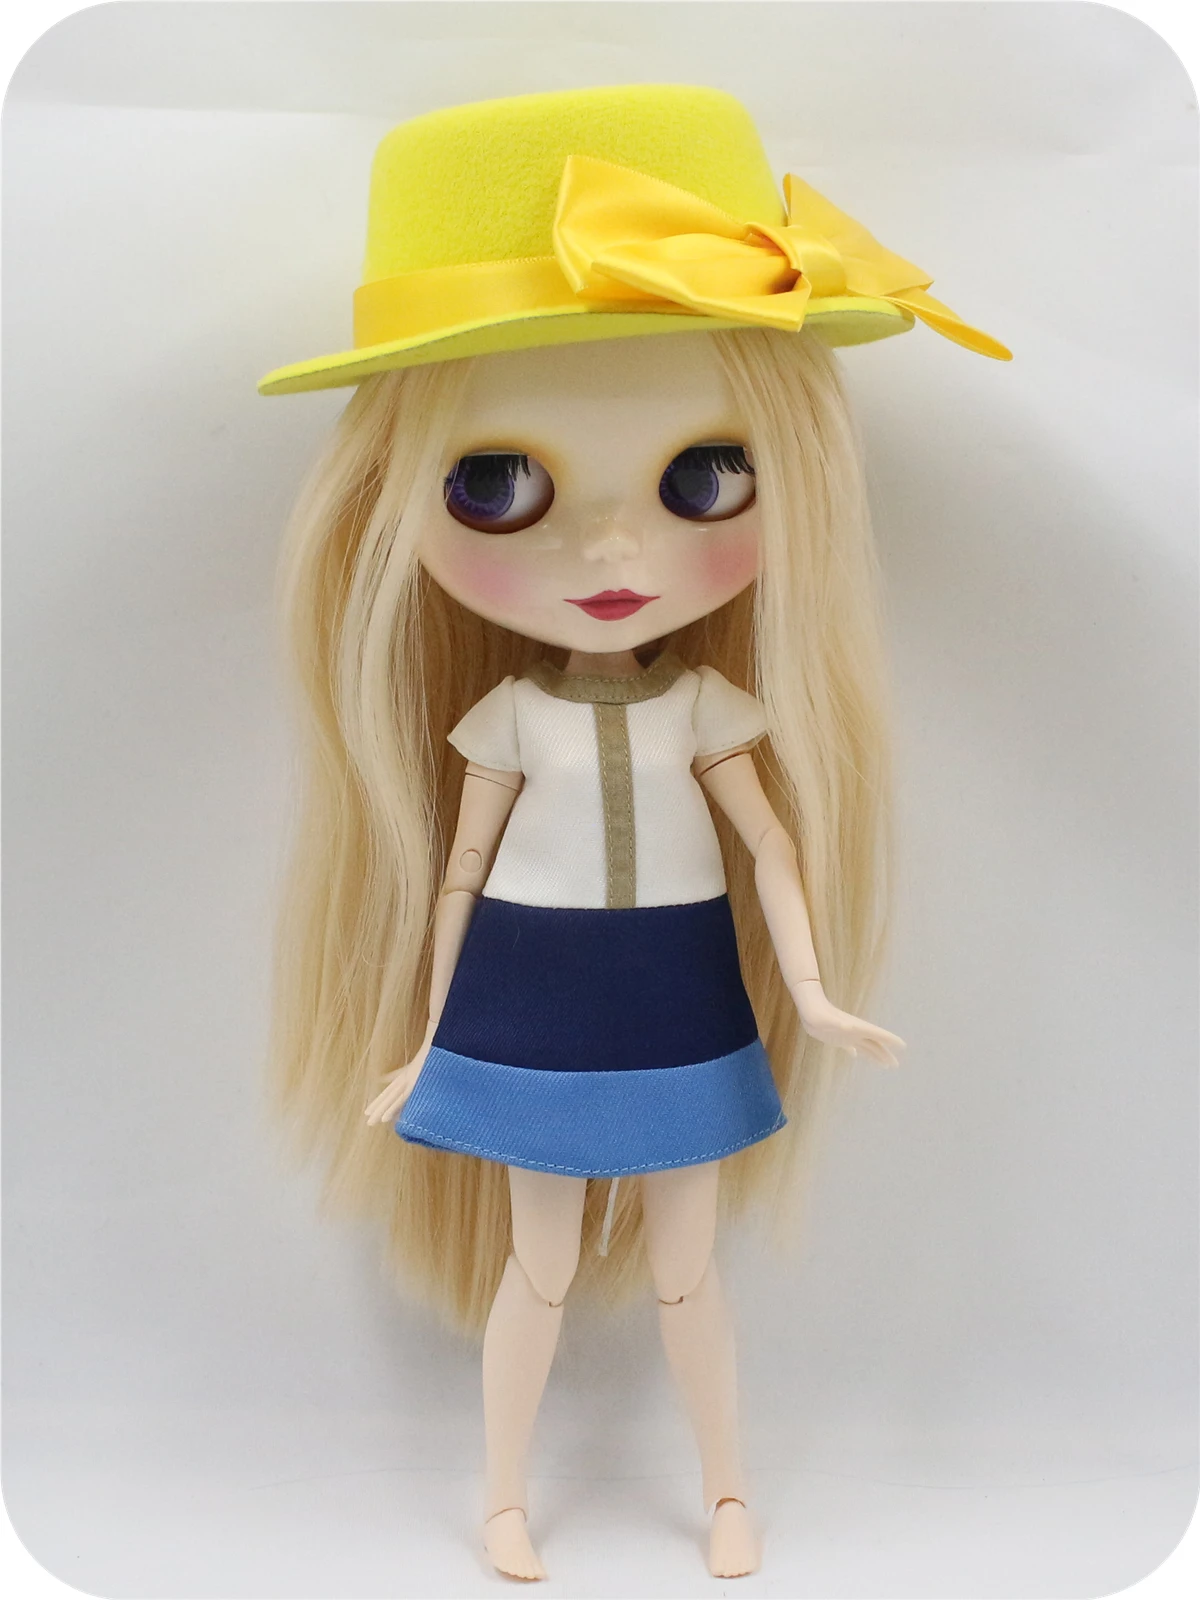 Neo Blythe Doll with Blonde Hair, White Skin, Shiny Face & Factory Jointed Body 3